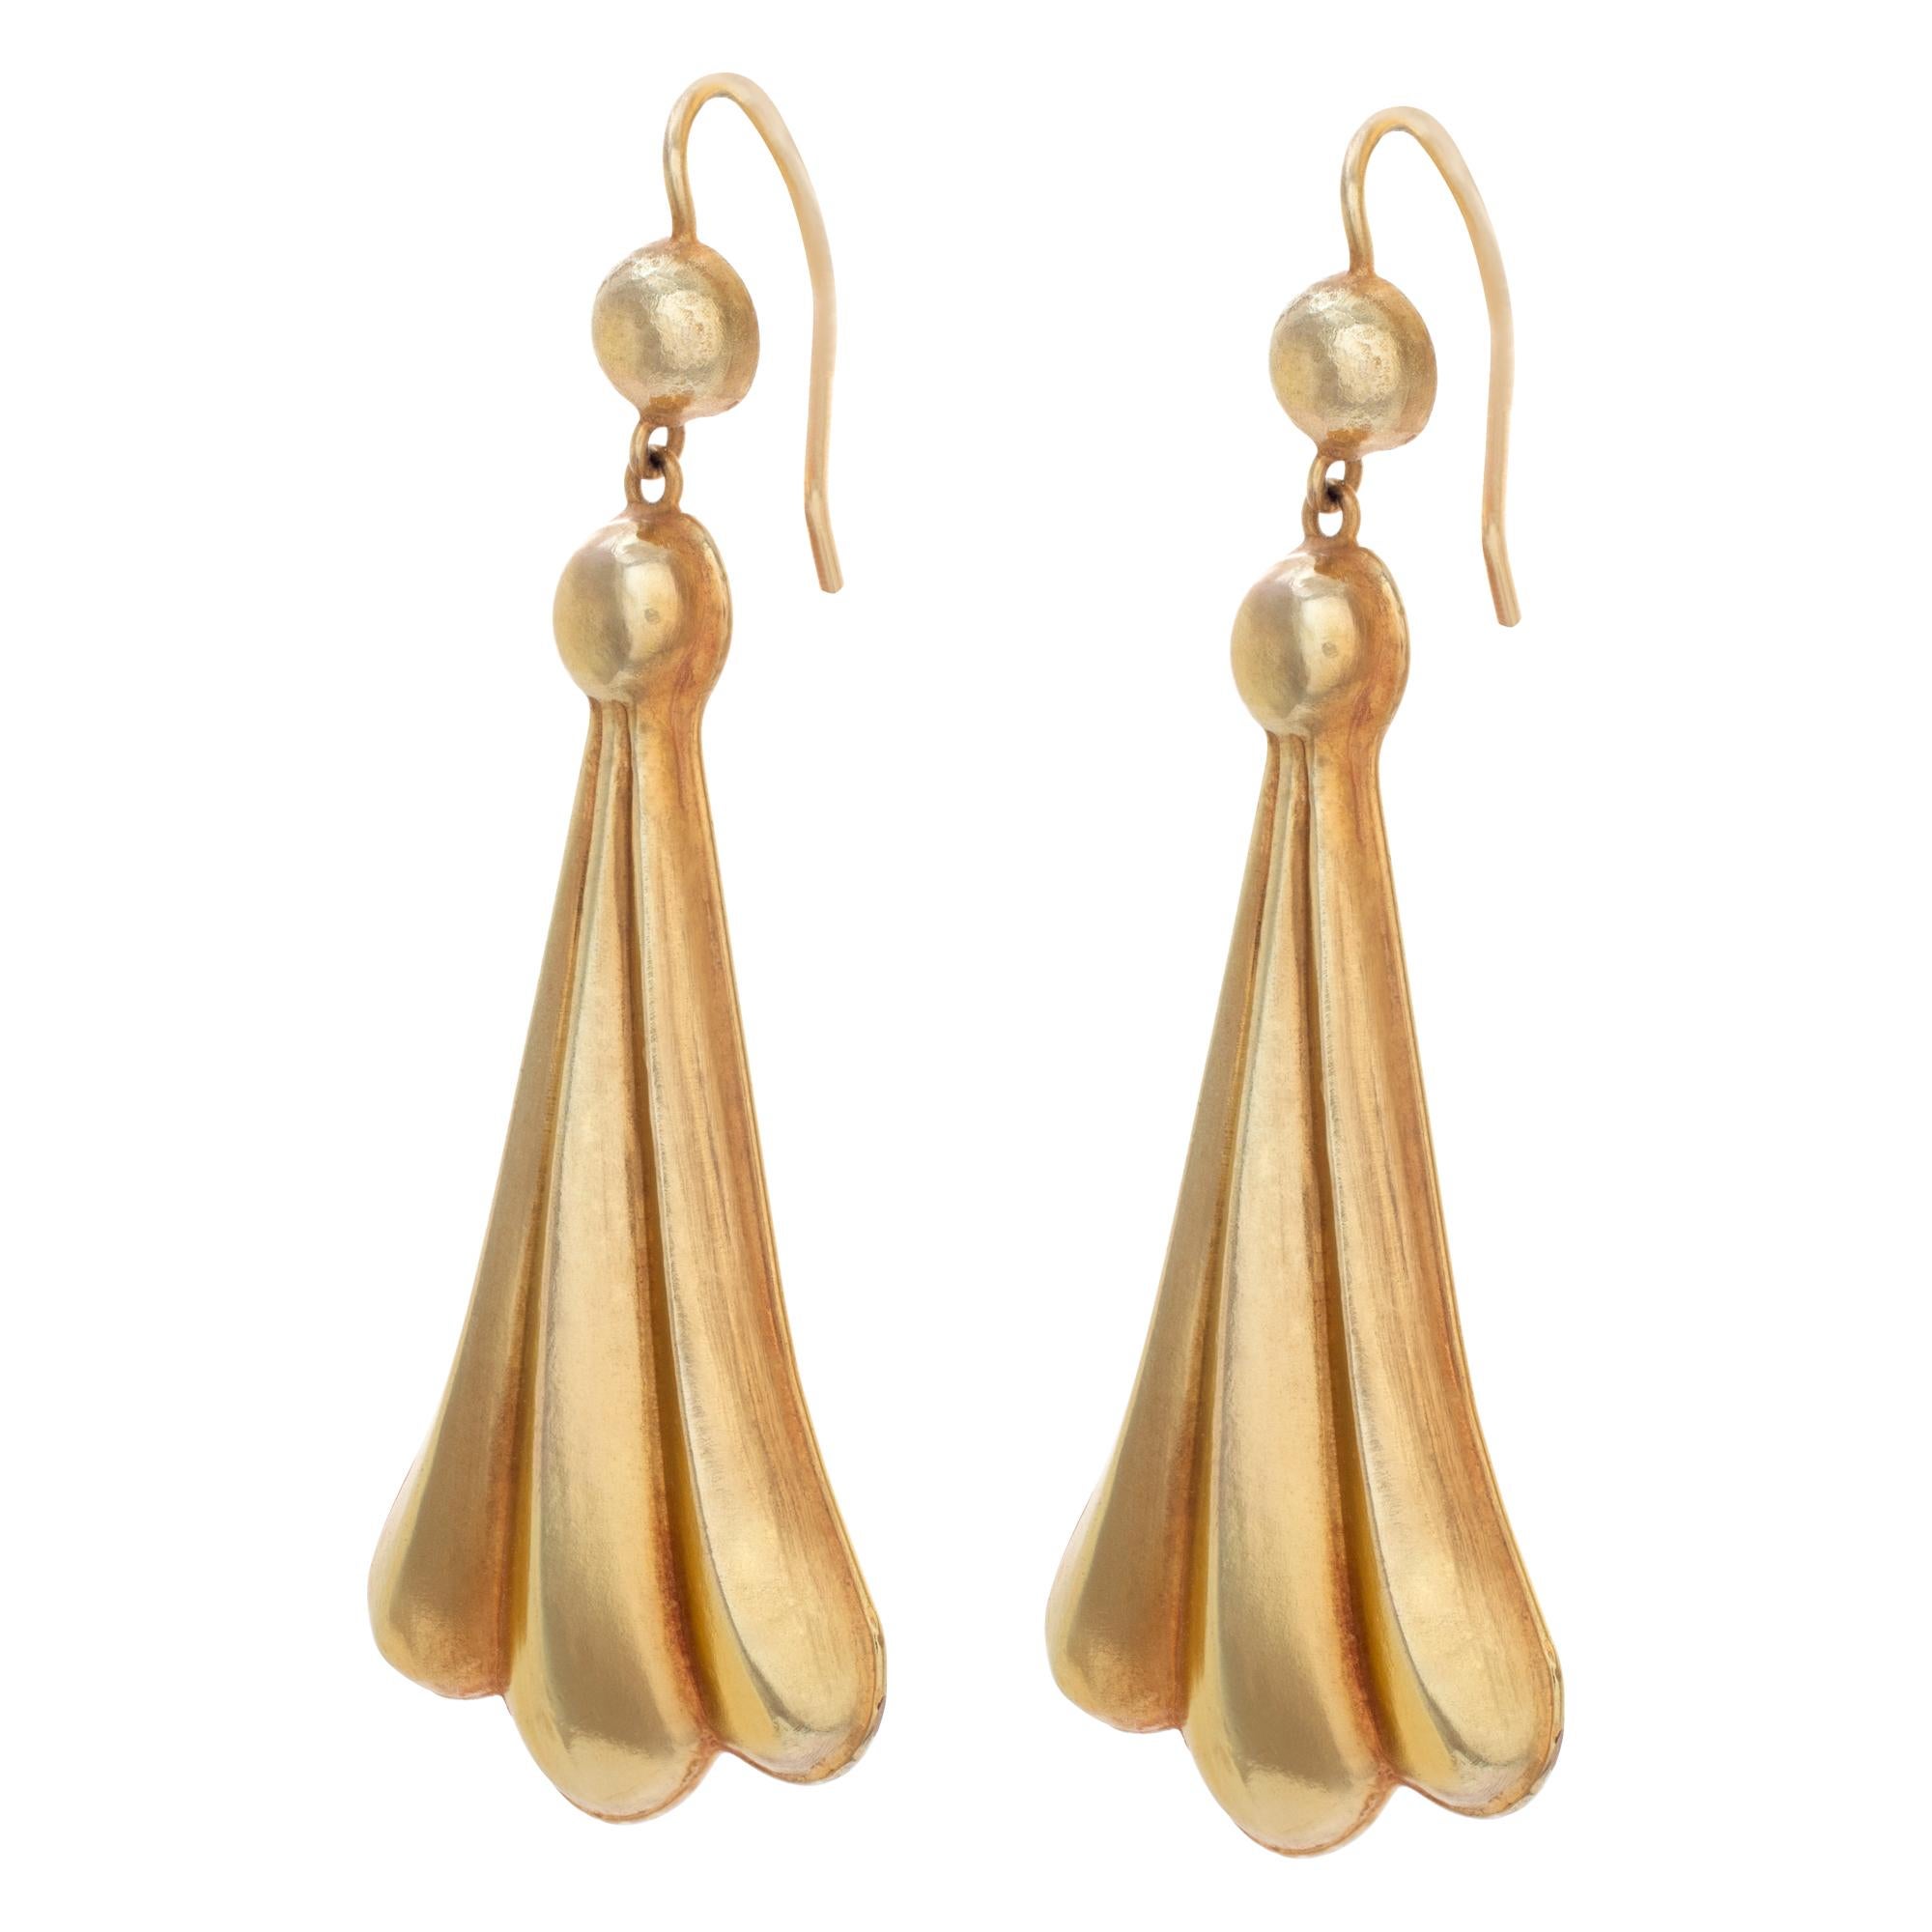 Greek Drop Earrings in 18k Yellow Gold In Excellent Condition For Sale In Surfside, FL